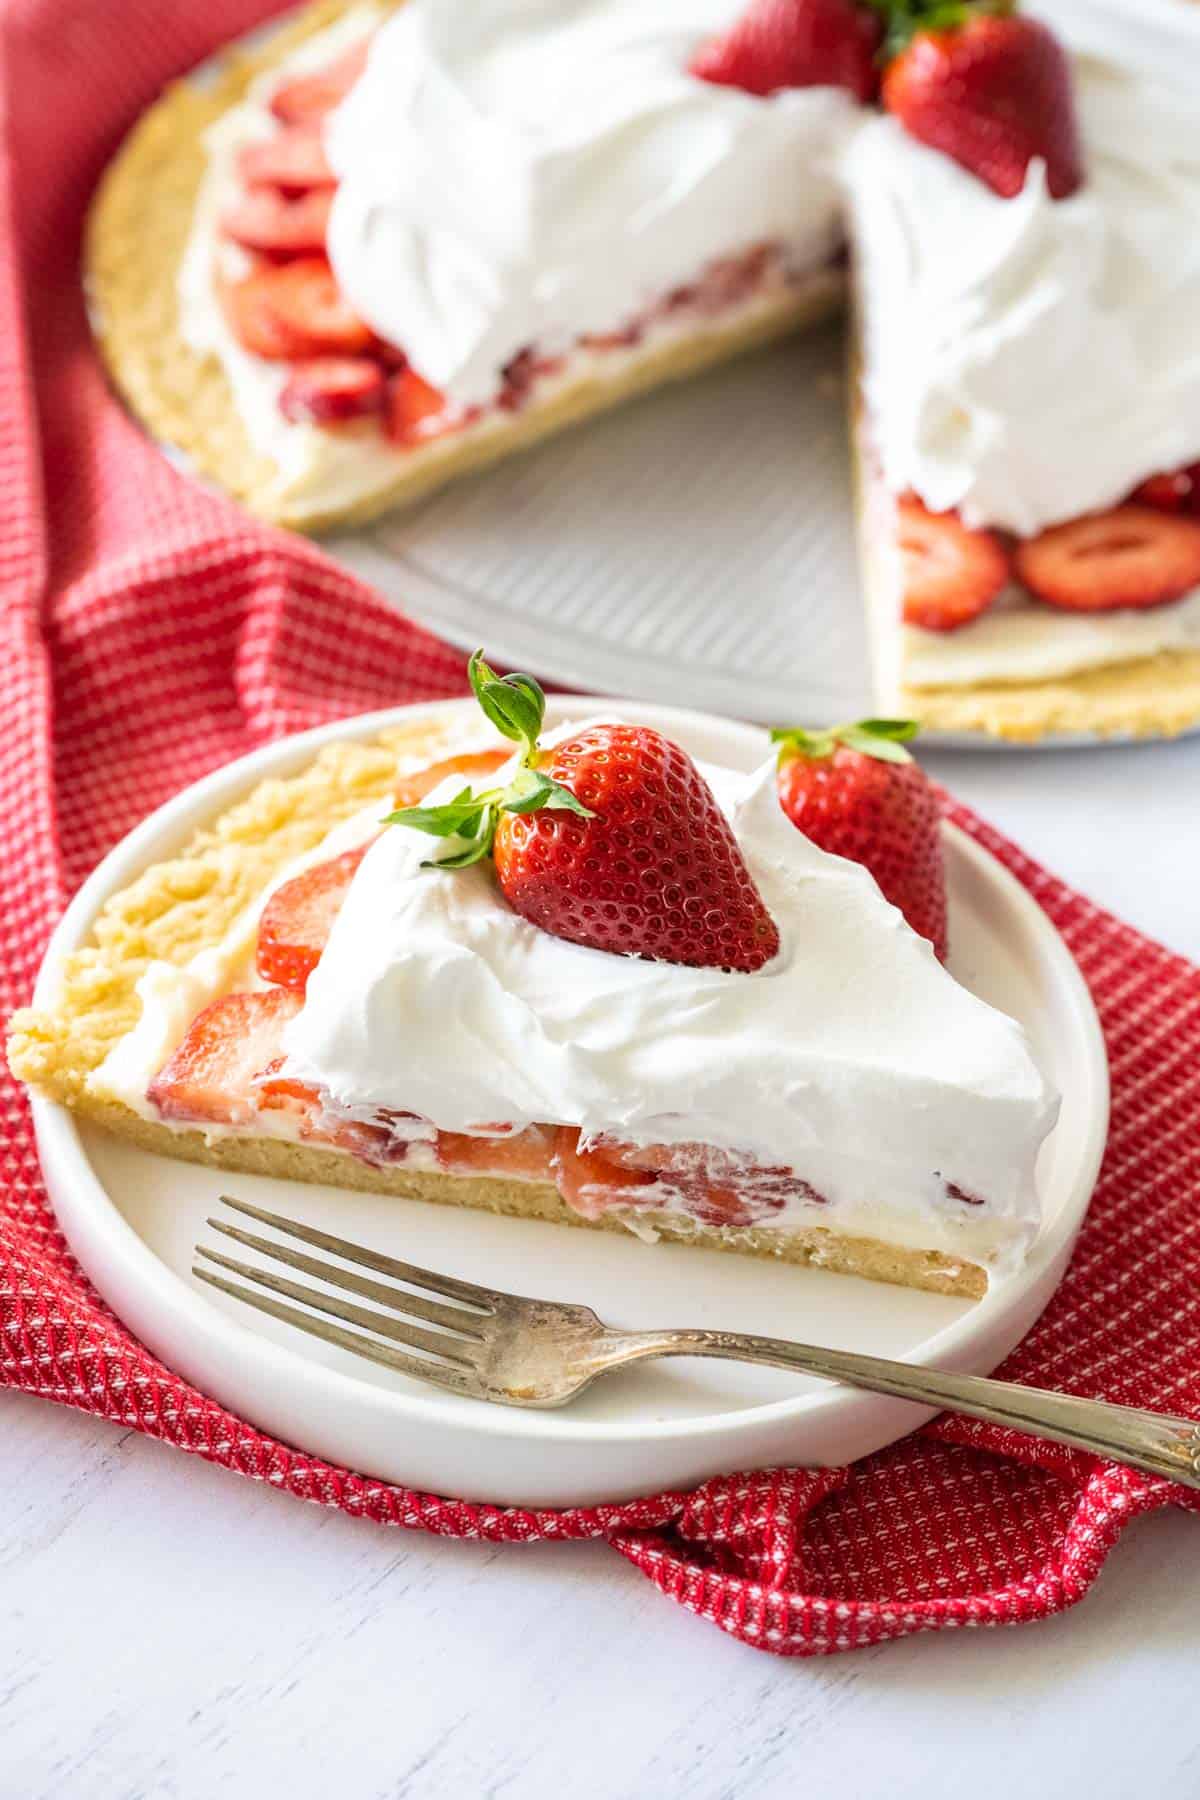 Slice of strawberry dessert showing delicious layers of cookie crust, cheesecake filling, sliced strawberries, and whipped topping.